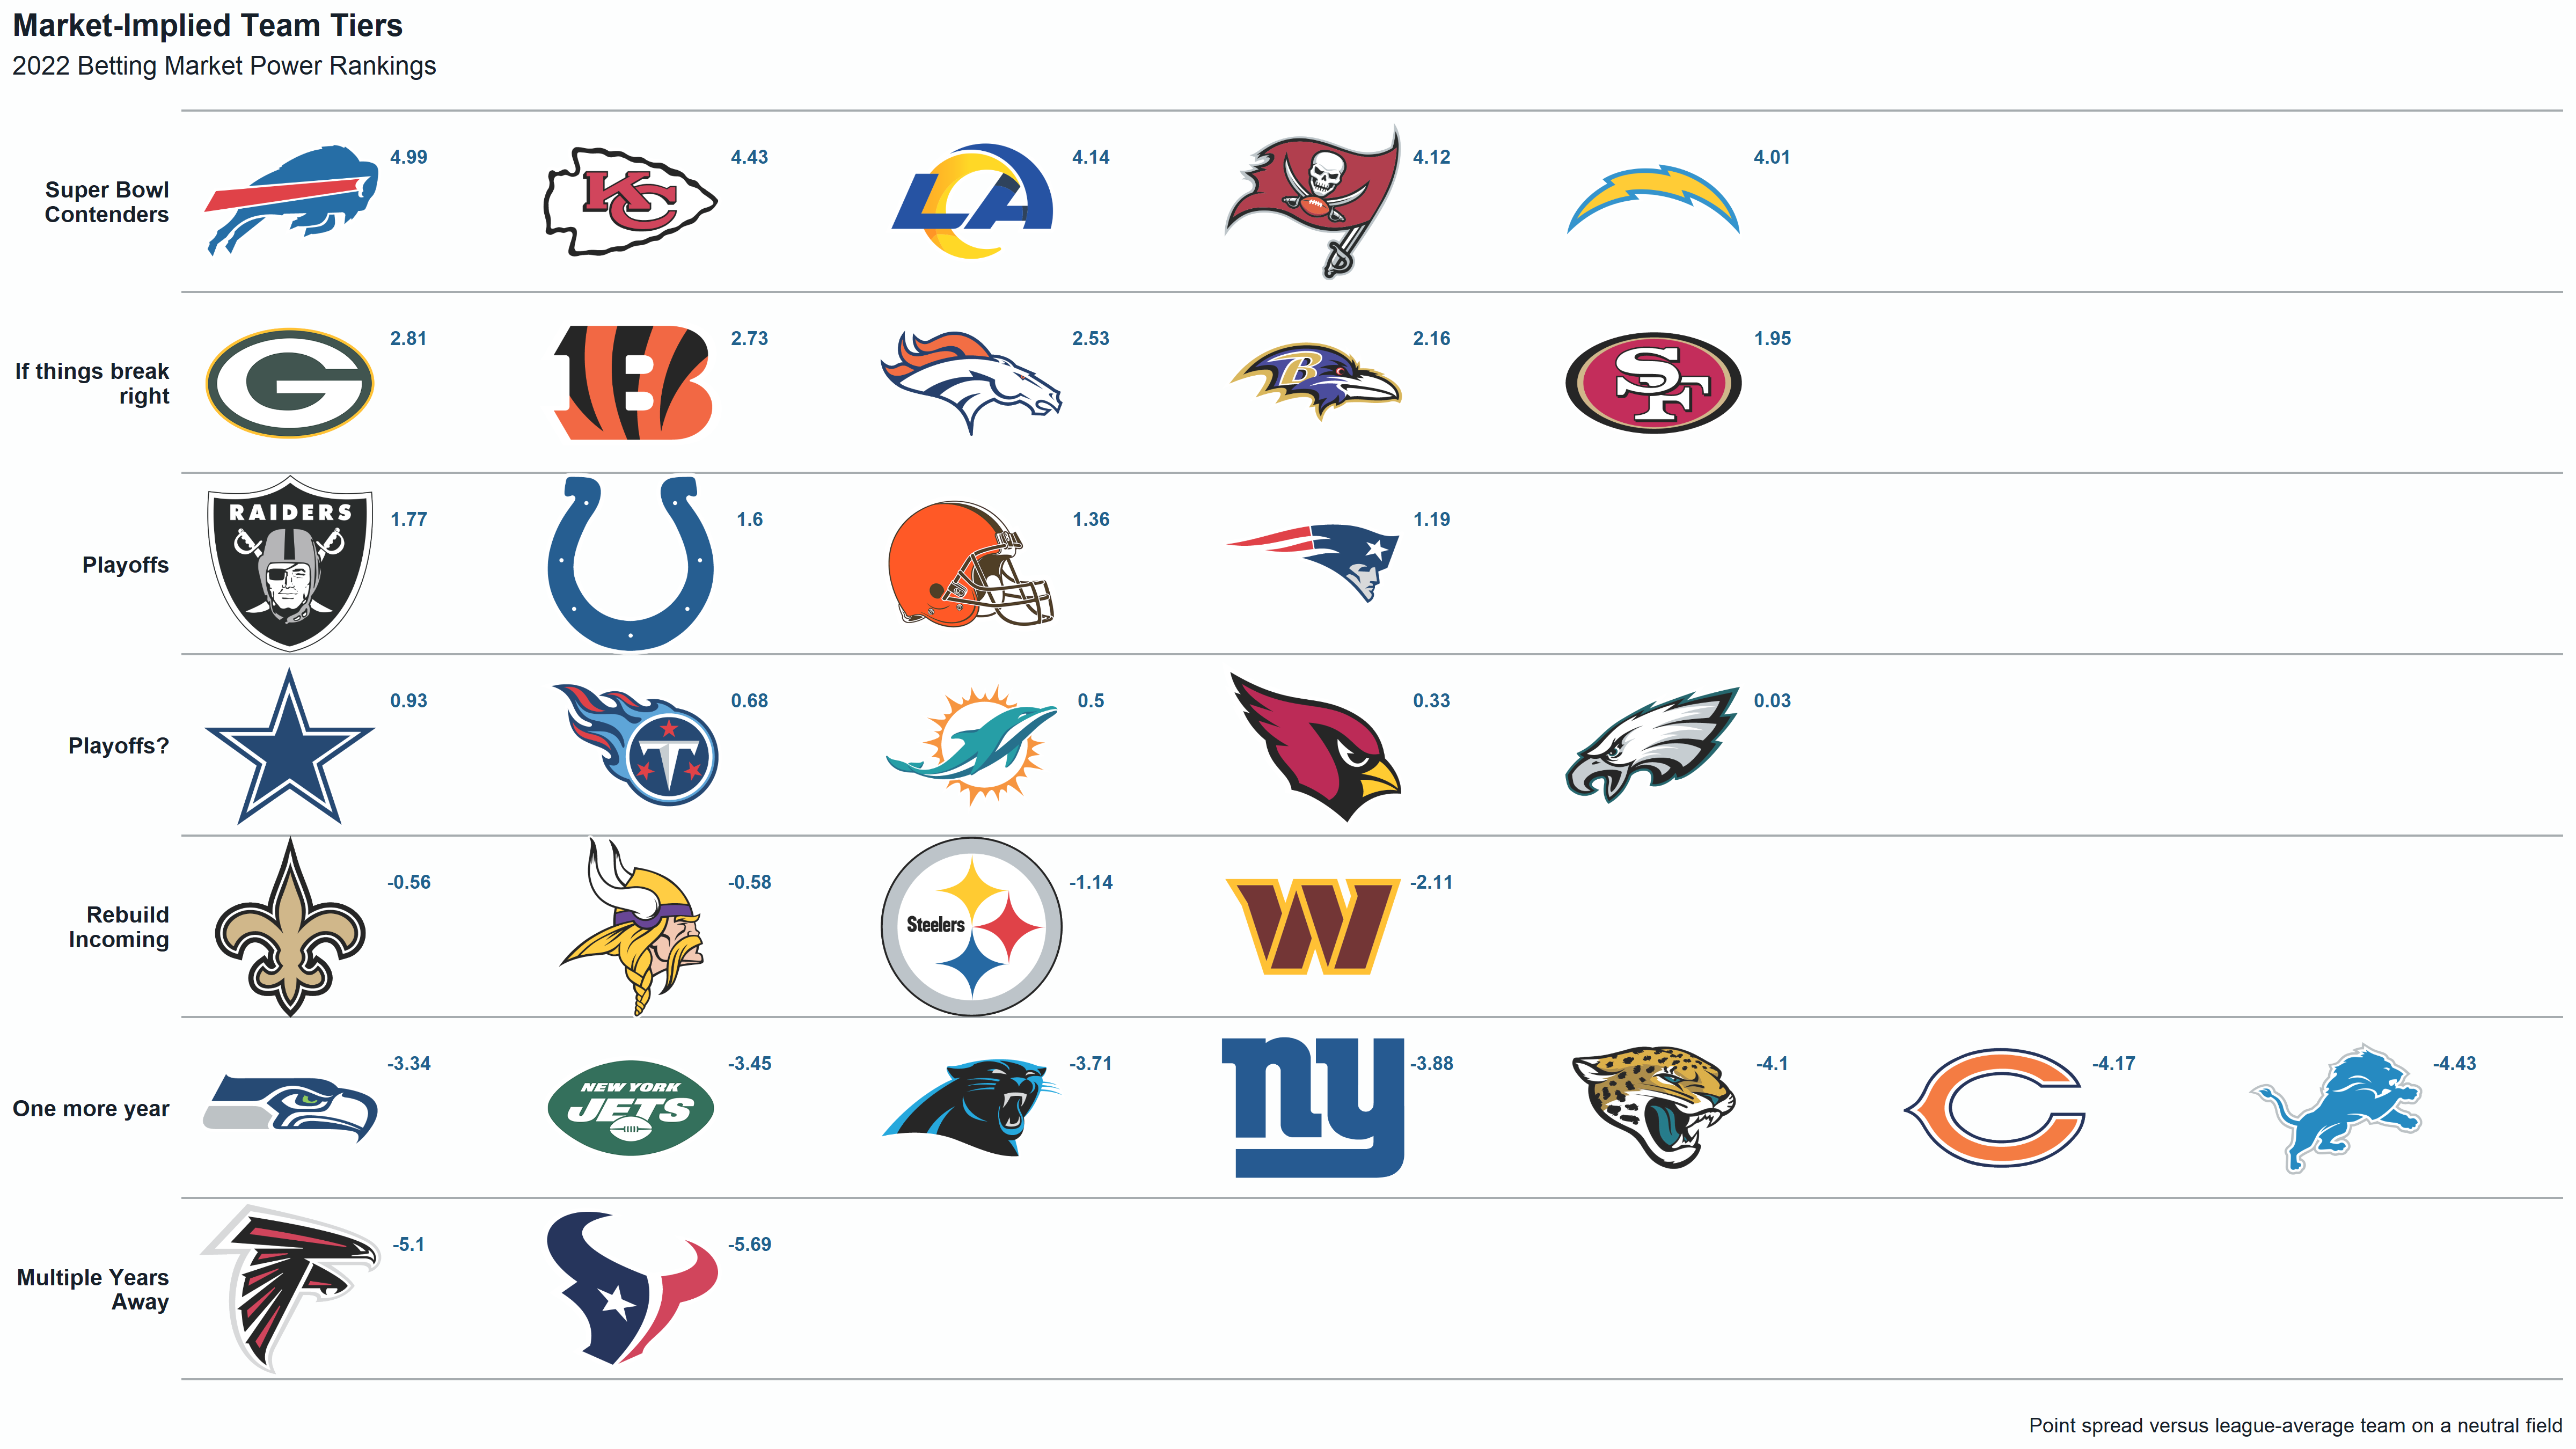 NFL Betting 2022: Market-implied power rankings and ELO strength of schedule, NFL and NCAA Betting Picks